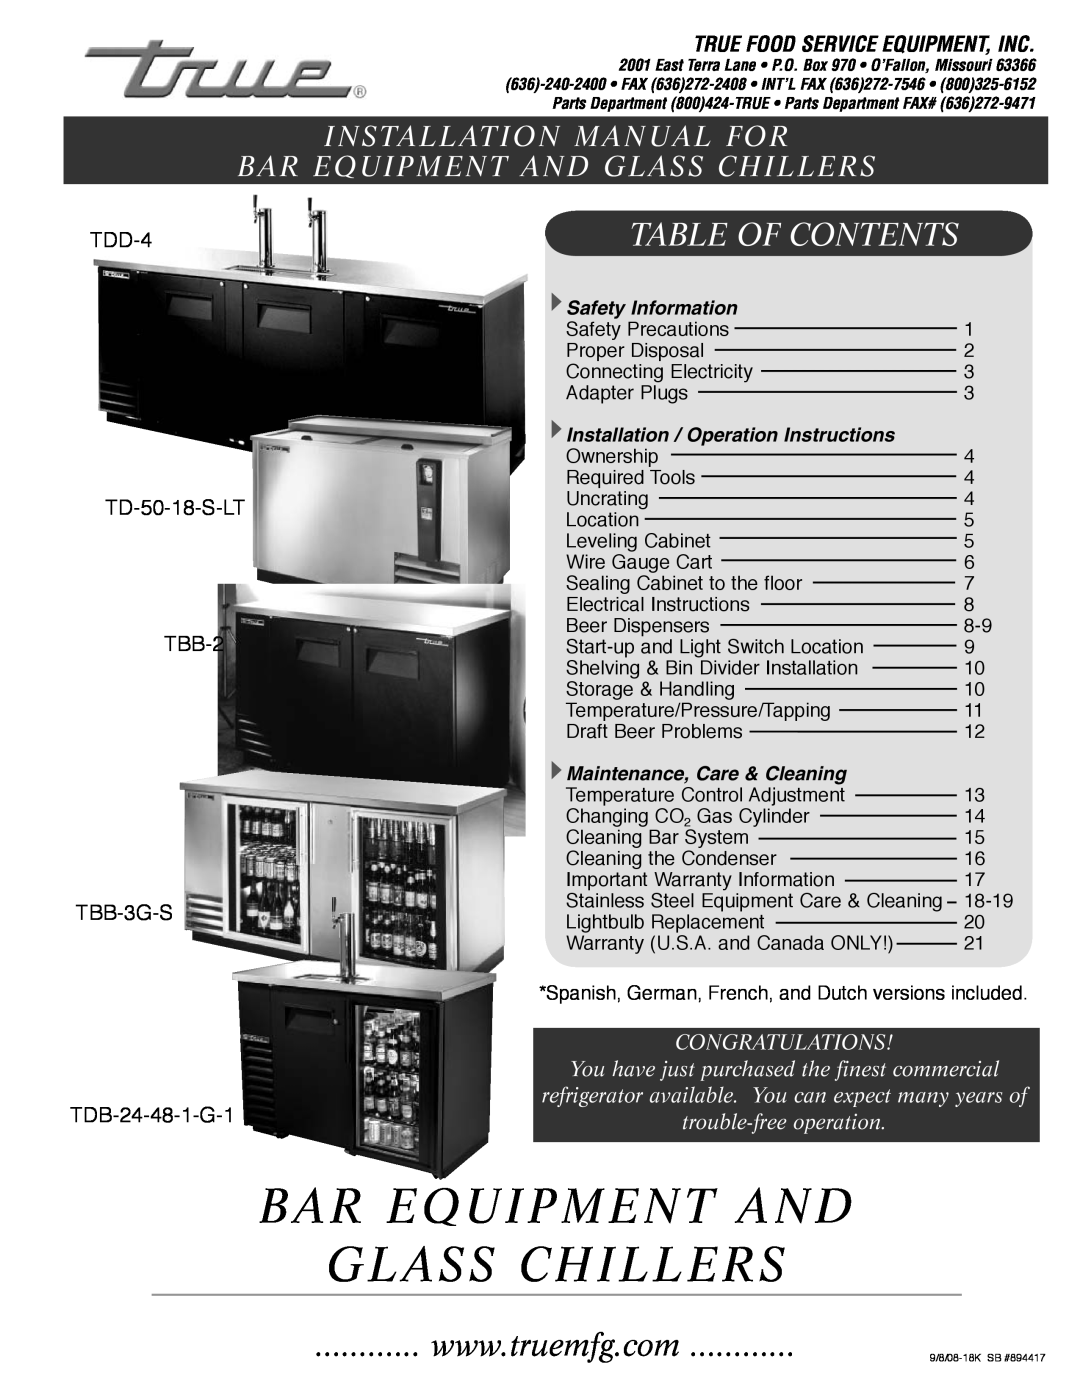 True Manufacturing Company TDD-4, TD-50-18-S-LT installation manual Bar Equipment And Glass Chillers, Table Of Contents 